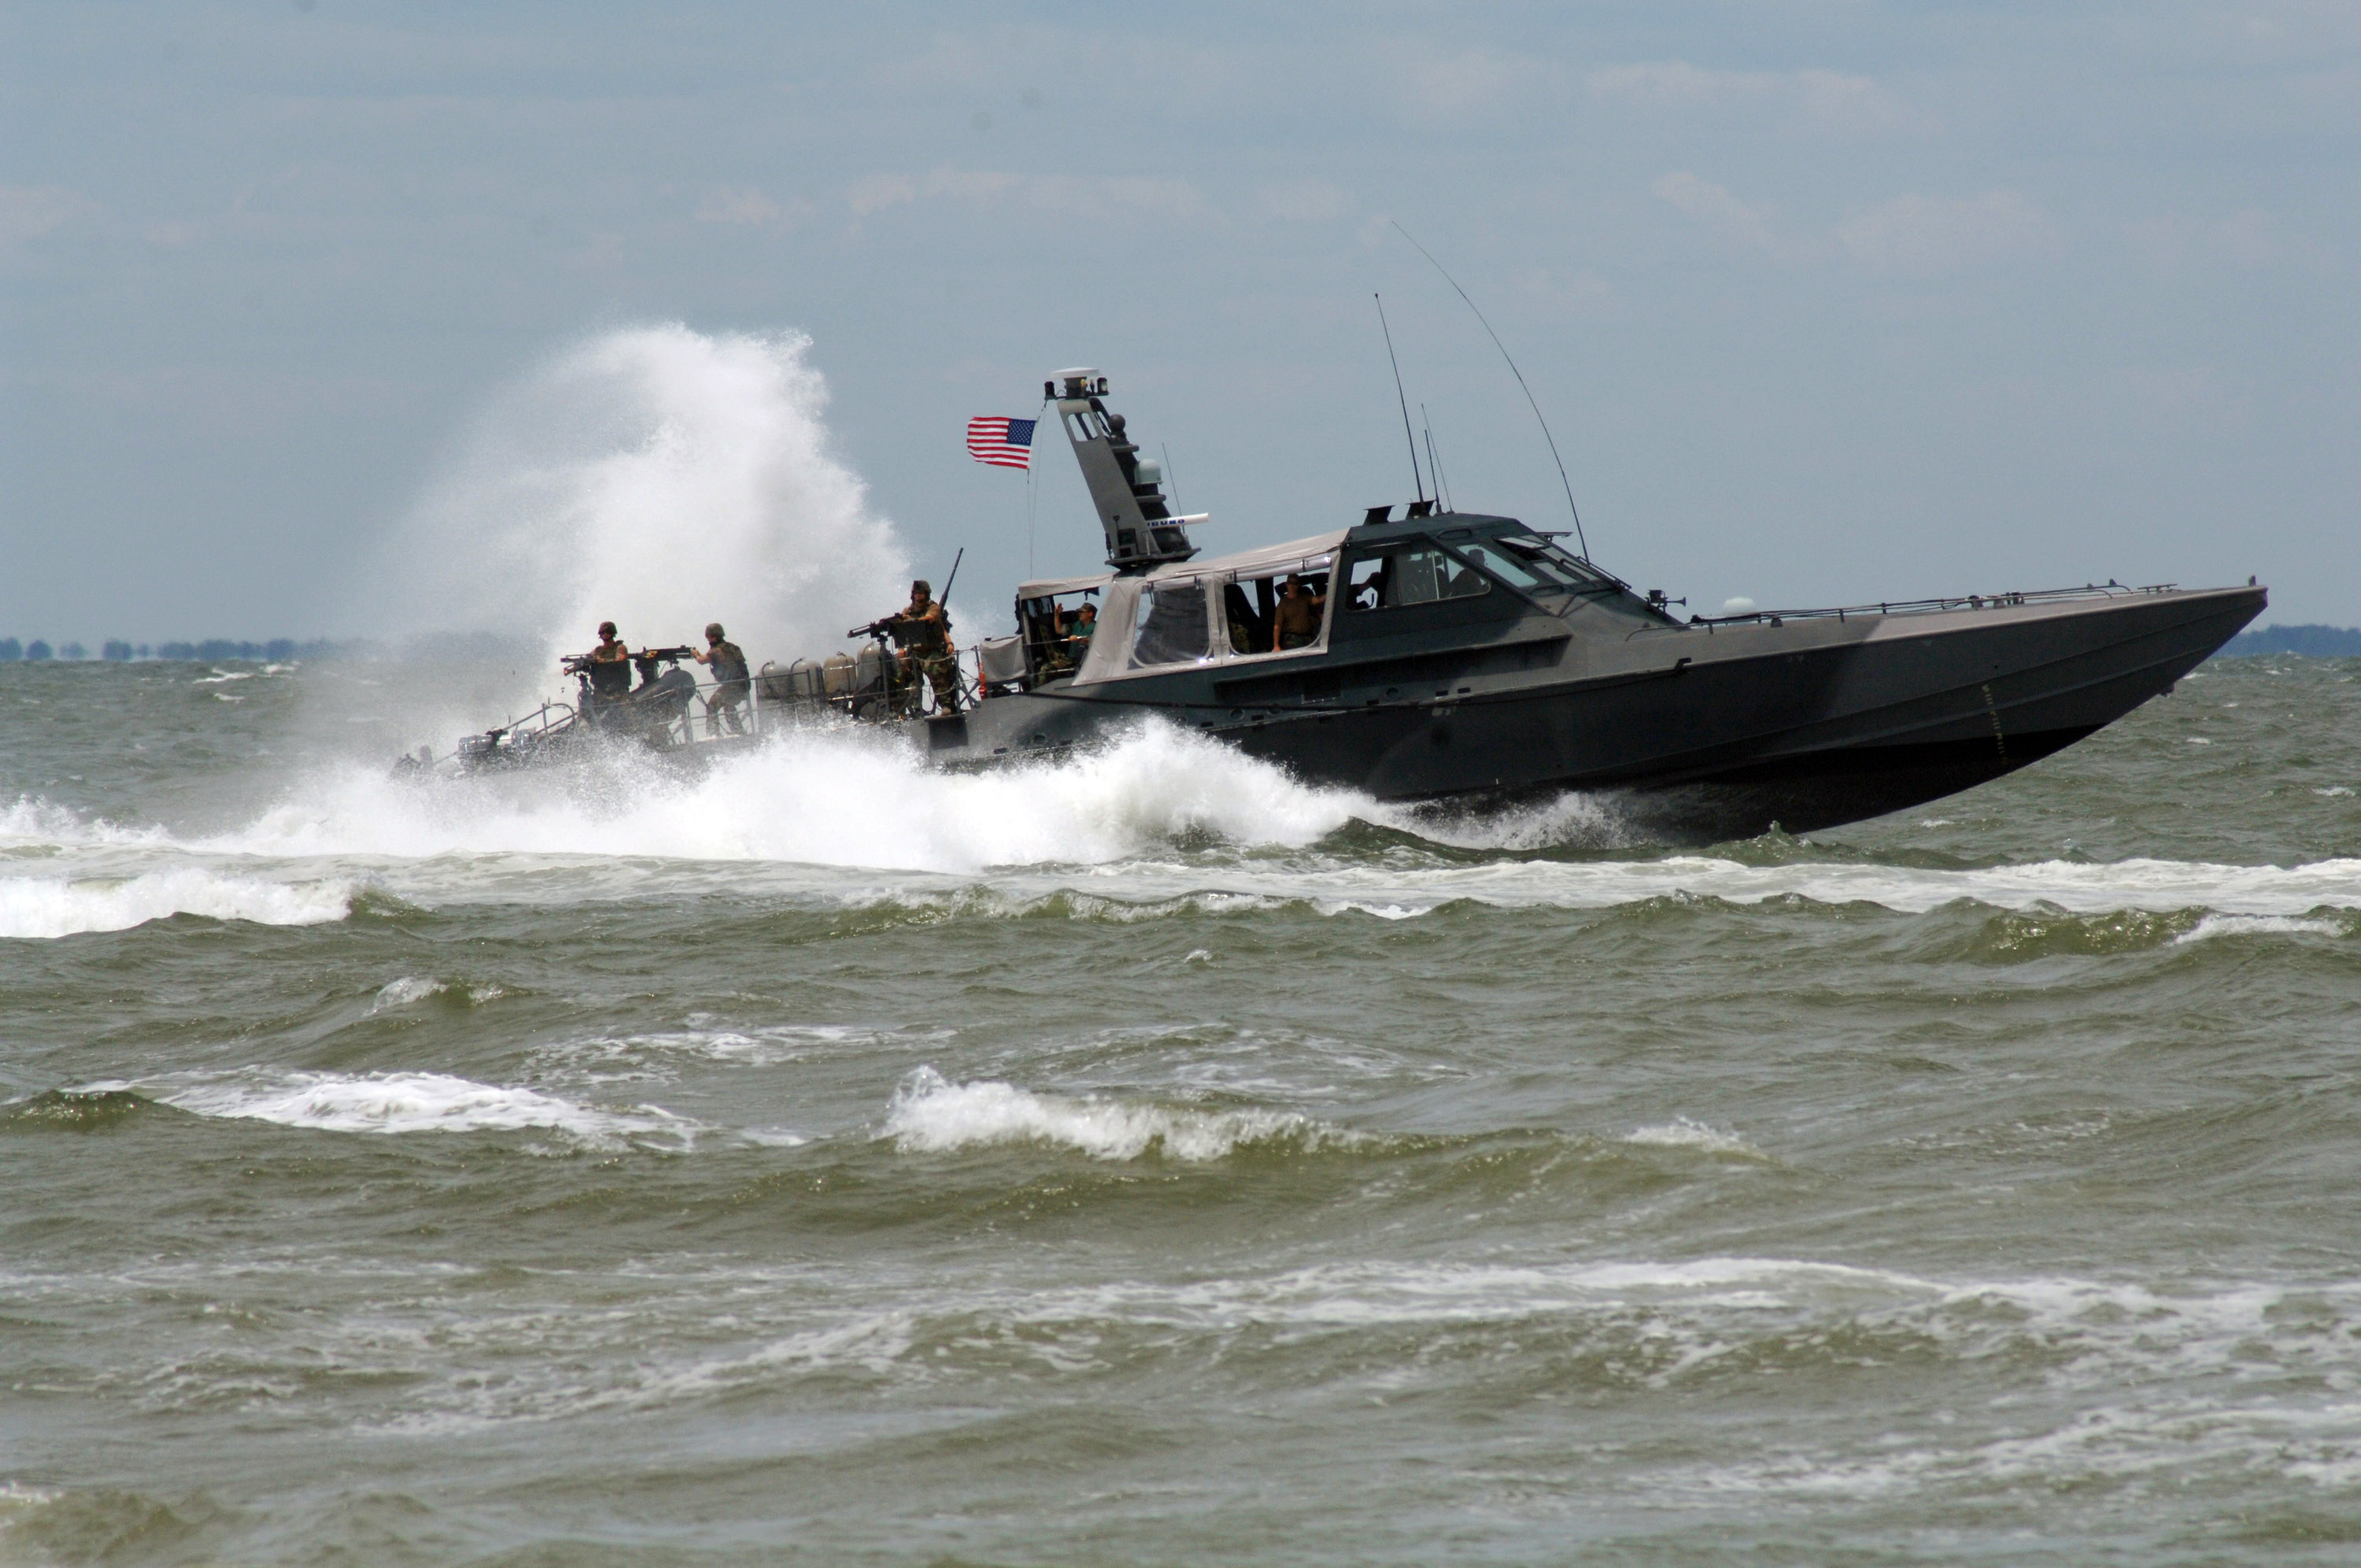 US_Navy_070721-N-5606H-002_A_MK_V_special_operations_craft_provides_cover_fire_during_the_annual_East_Coast_SEAL_reunion_capabilities_demonstration.jpg